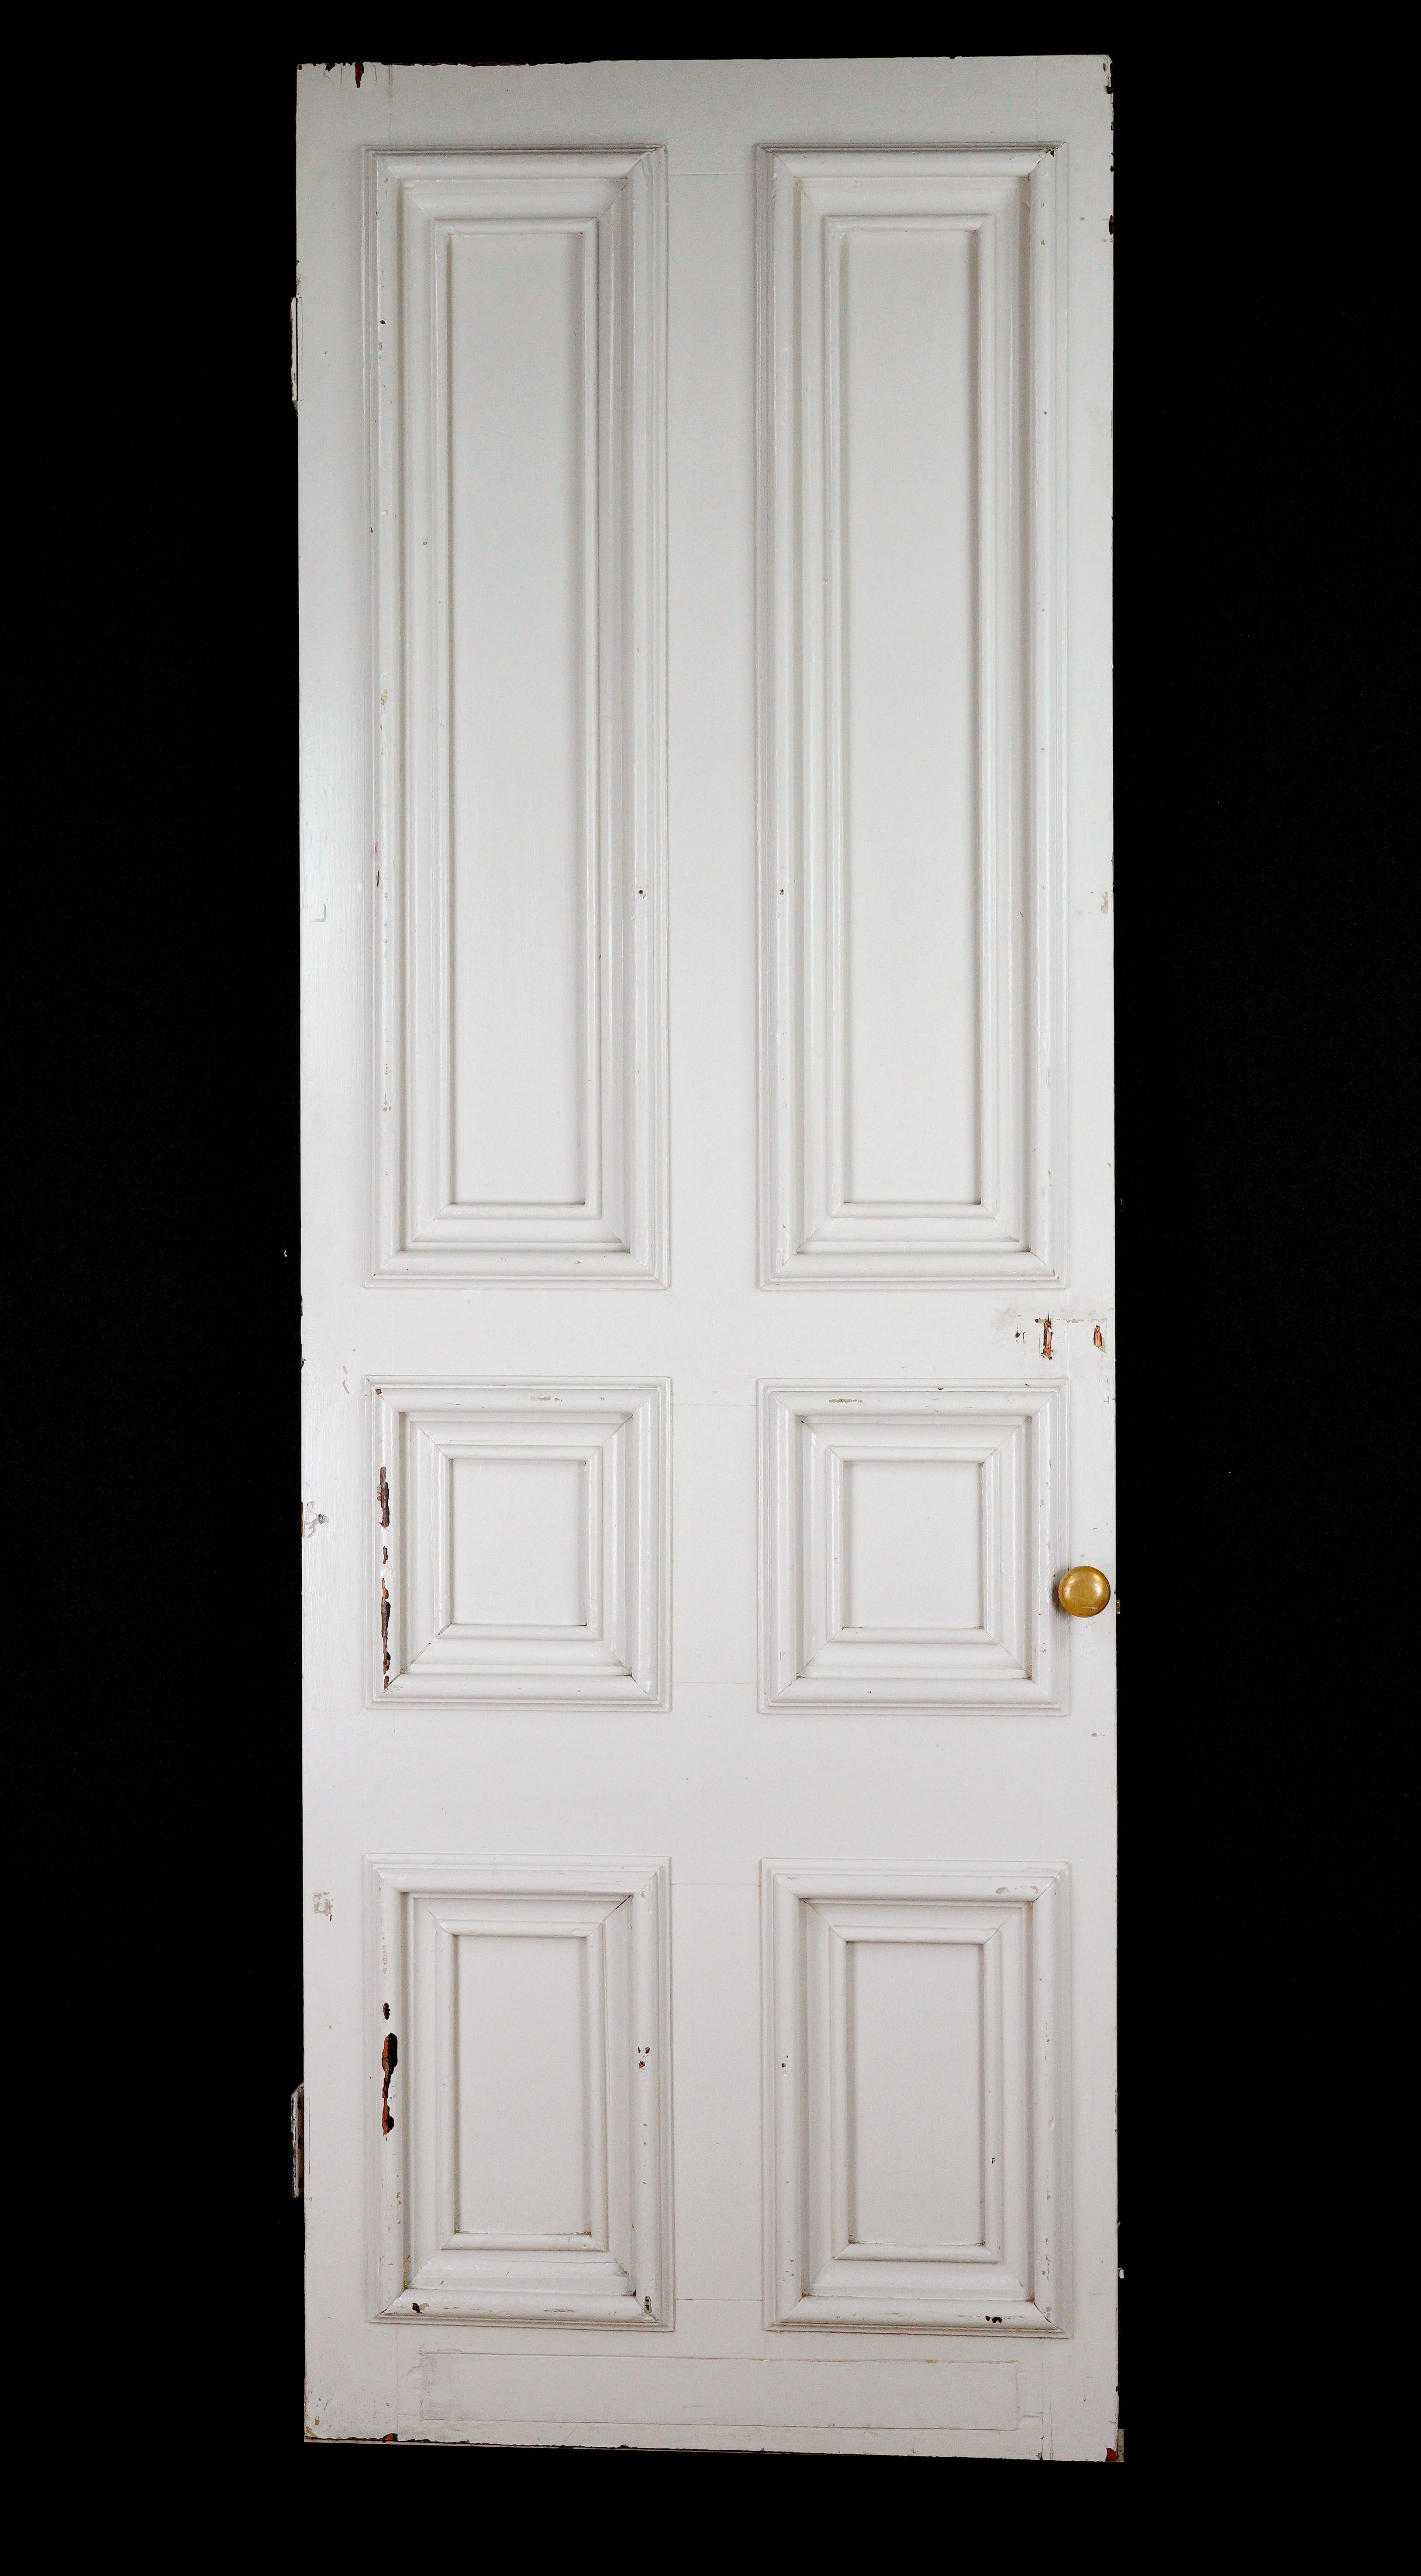 The antique white pine passage door features a classic design with a vent at the bottom, ensuring proper airflow and maintaining an elegant six double panel appearance. This is ideal for enhancing any interior space. Minor surface wear. Please note,